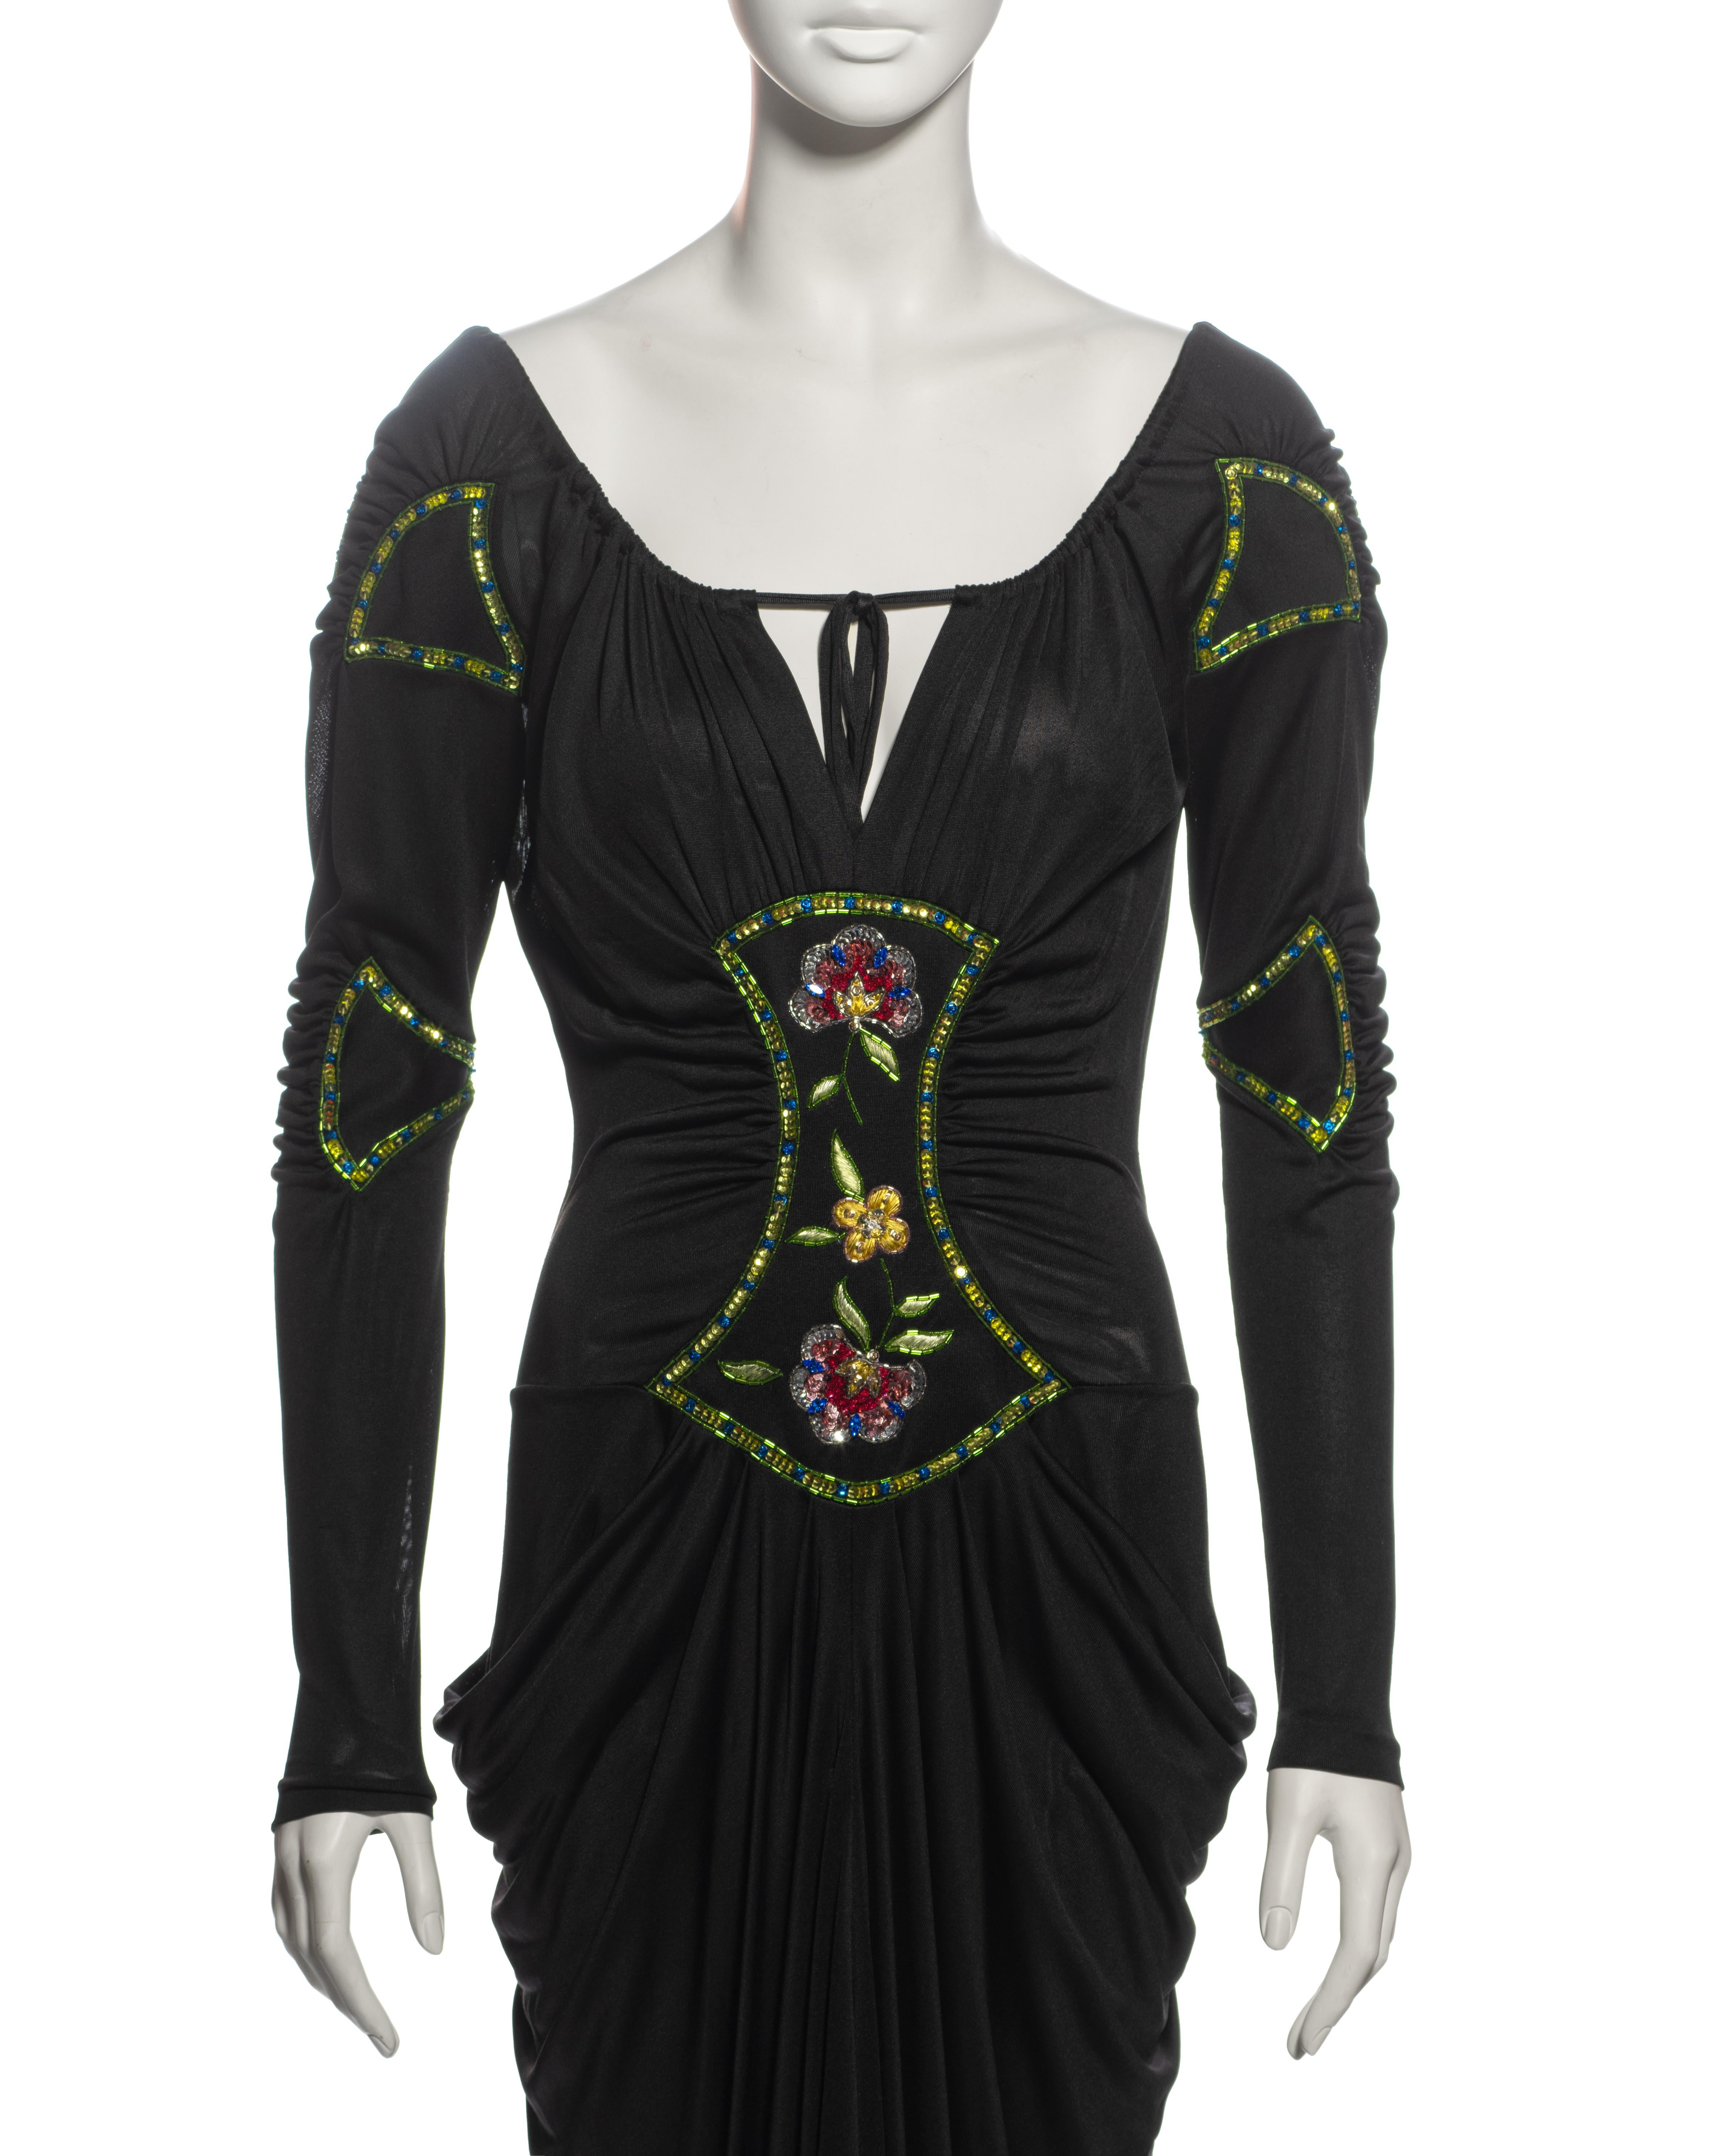 Christian Dior by John Galliano Black Viscose Embellished Draped Dress, ss 2002 In Excellent Condition For Sale In London, GB